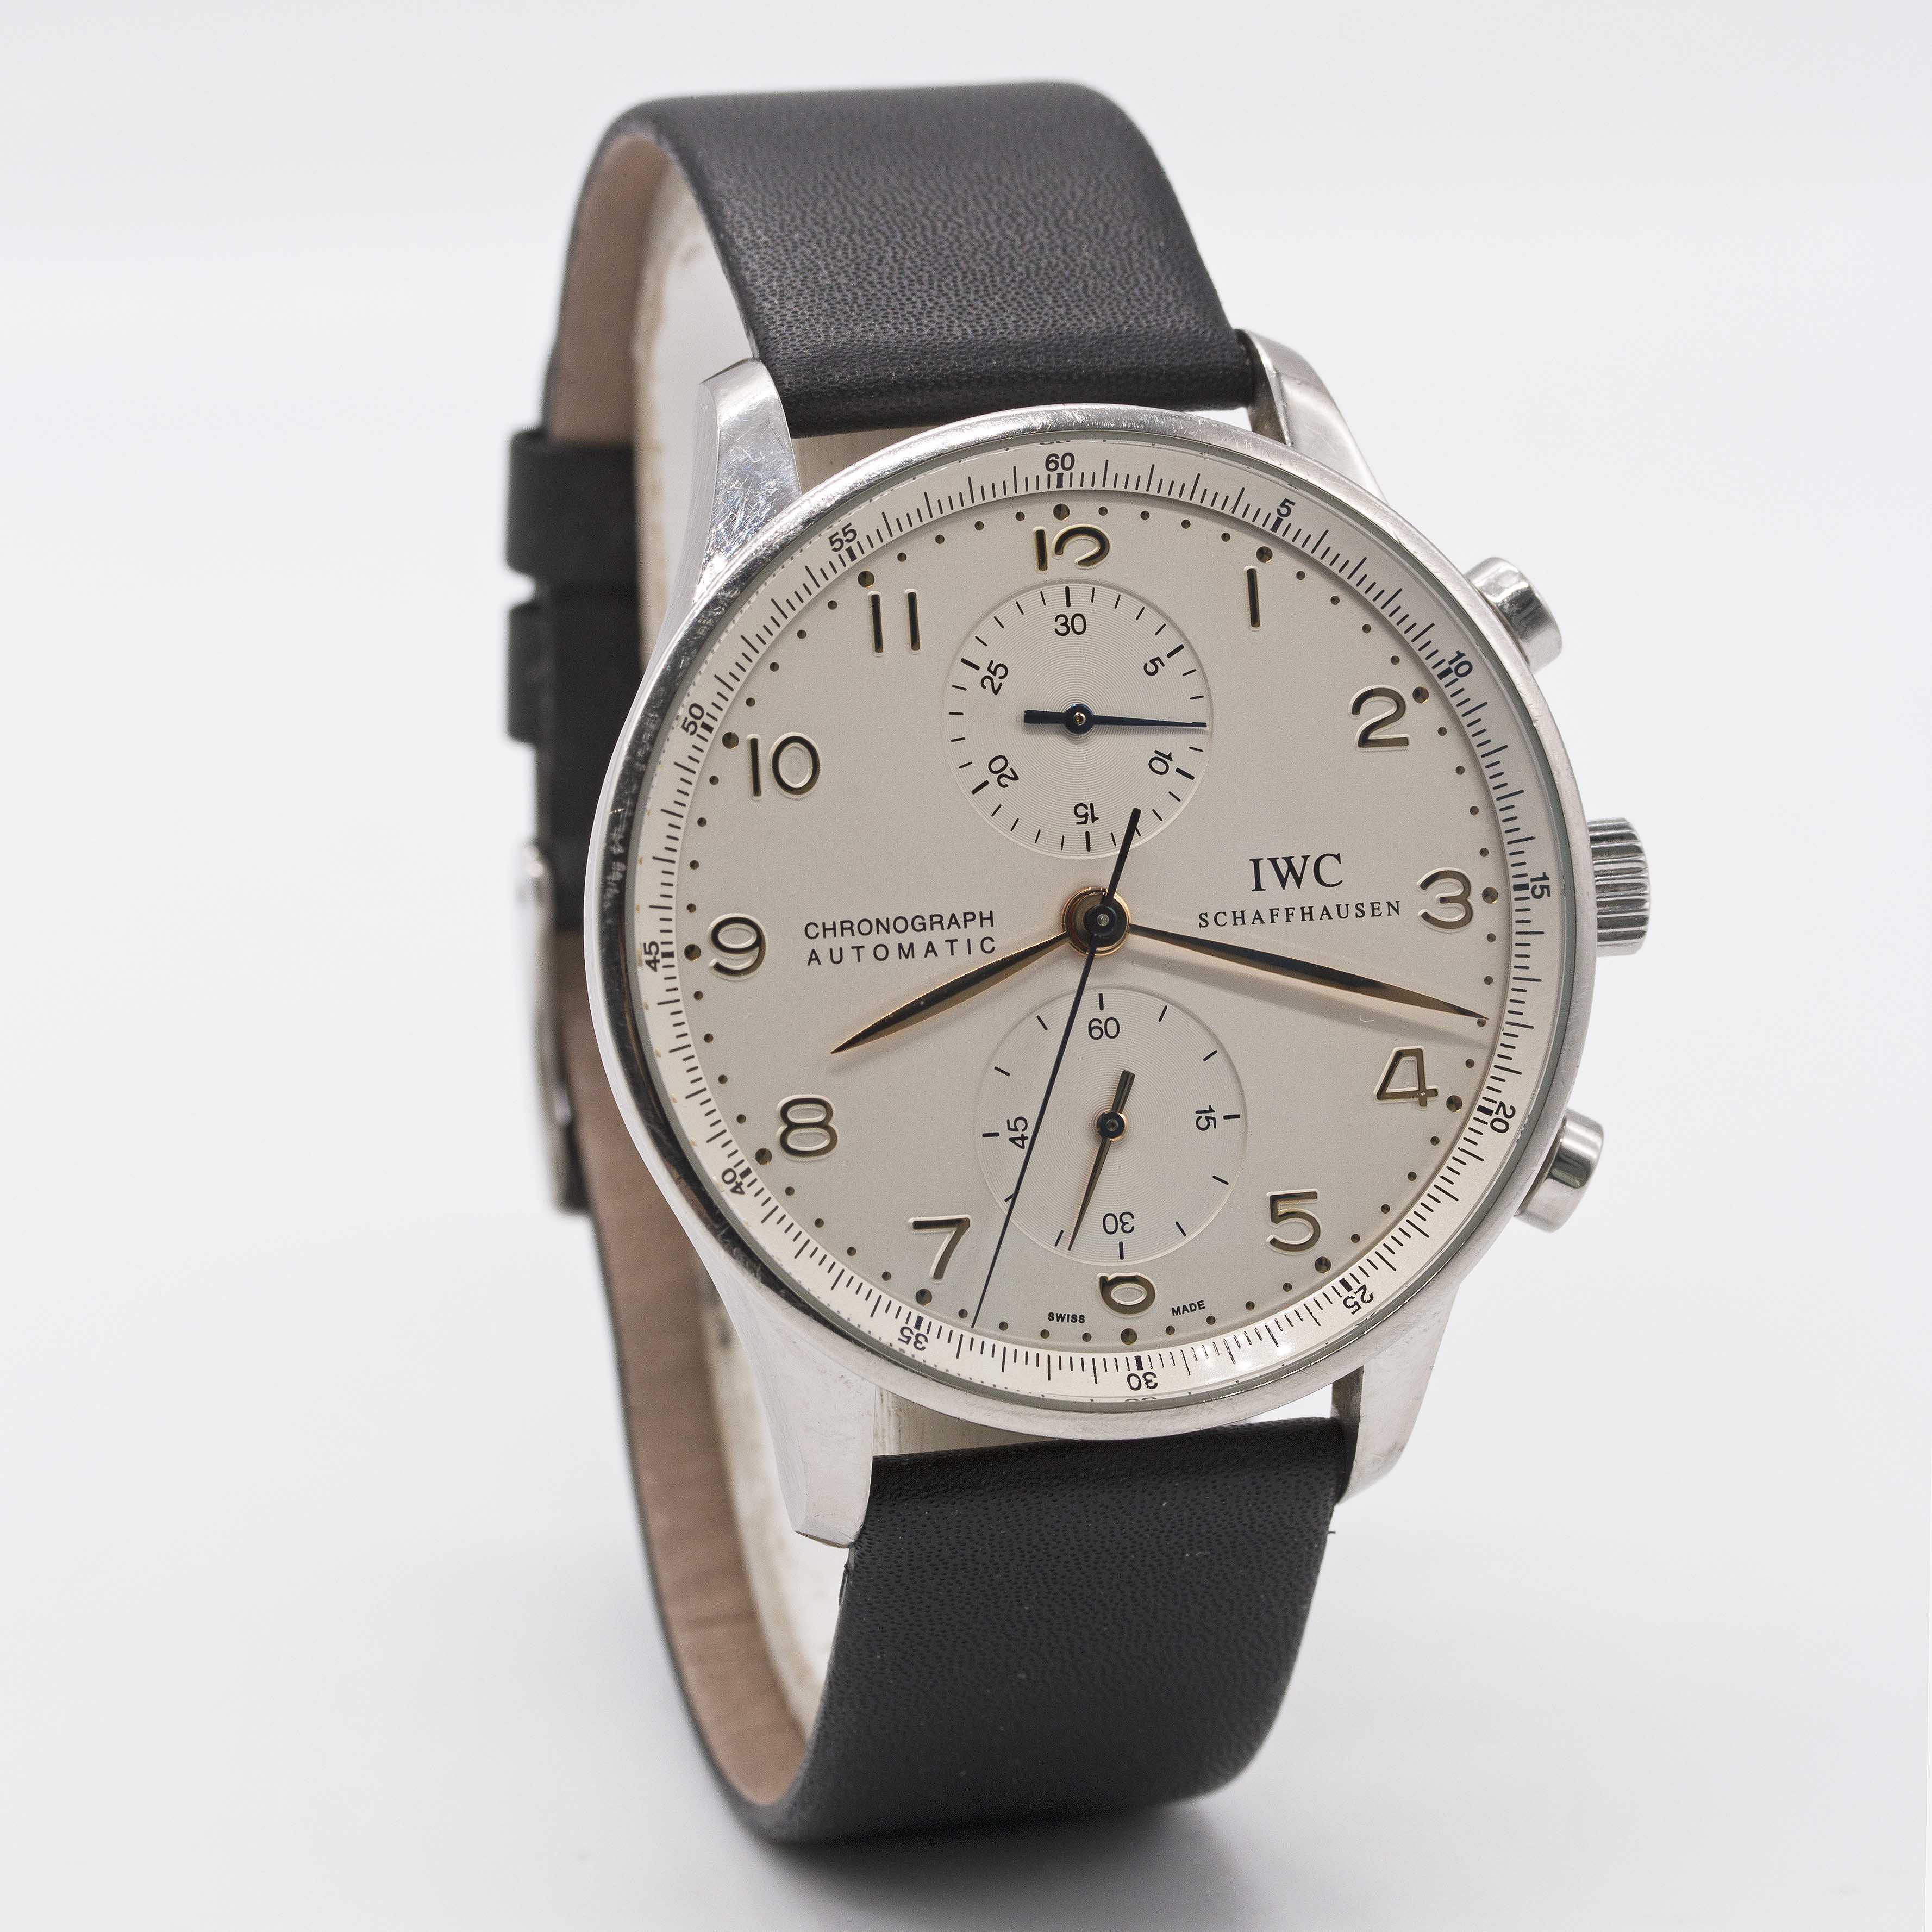 A GENTLEMAN'S STAINLESS STEEL IWC PORTUGUESE AUTOMATIC CHRONOGRAPH WRIST WATCH DATED 2007, REF. - Image 4 of 8